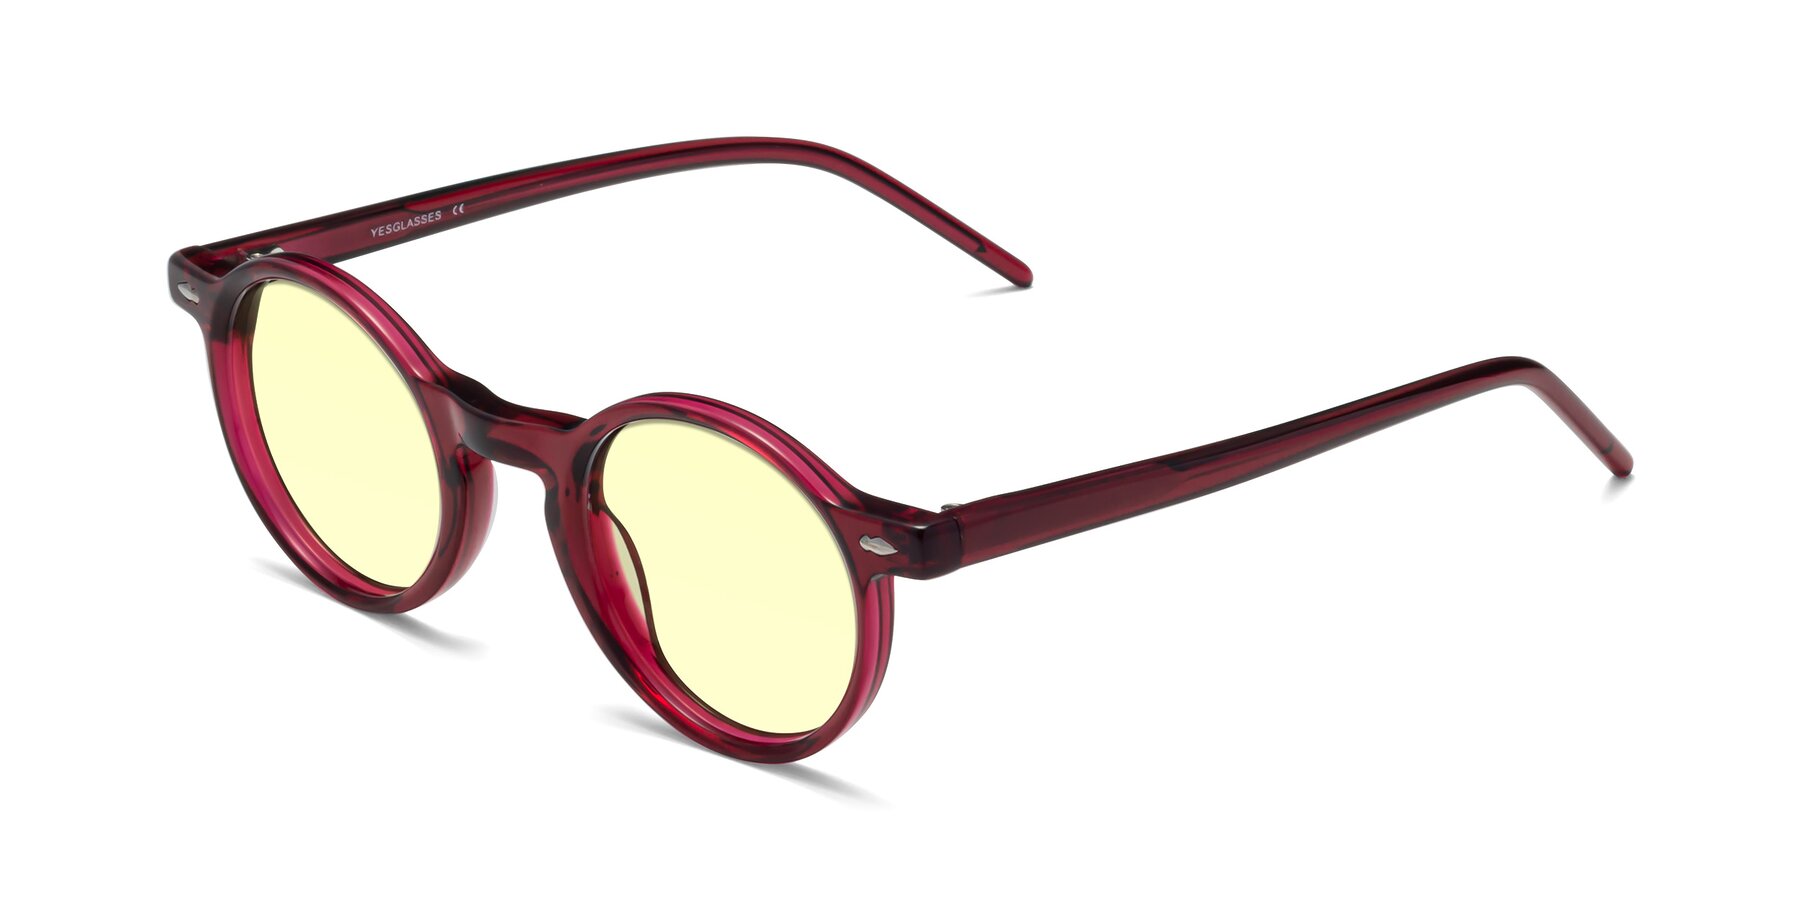 Angle of 1542 in Plum with Light Yellow Tinted Lenses